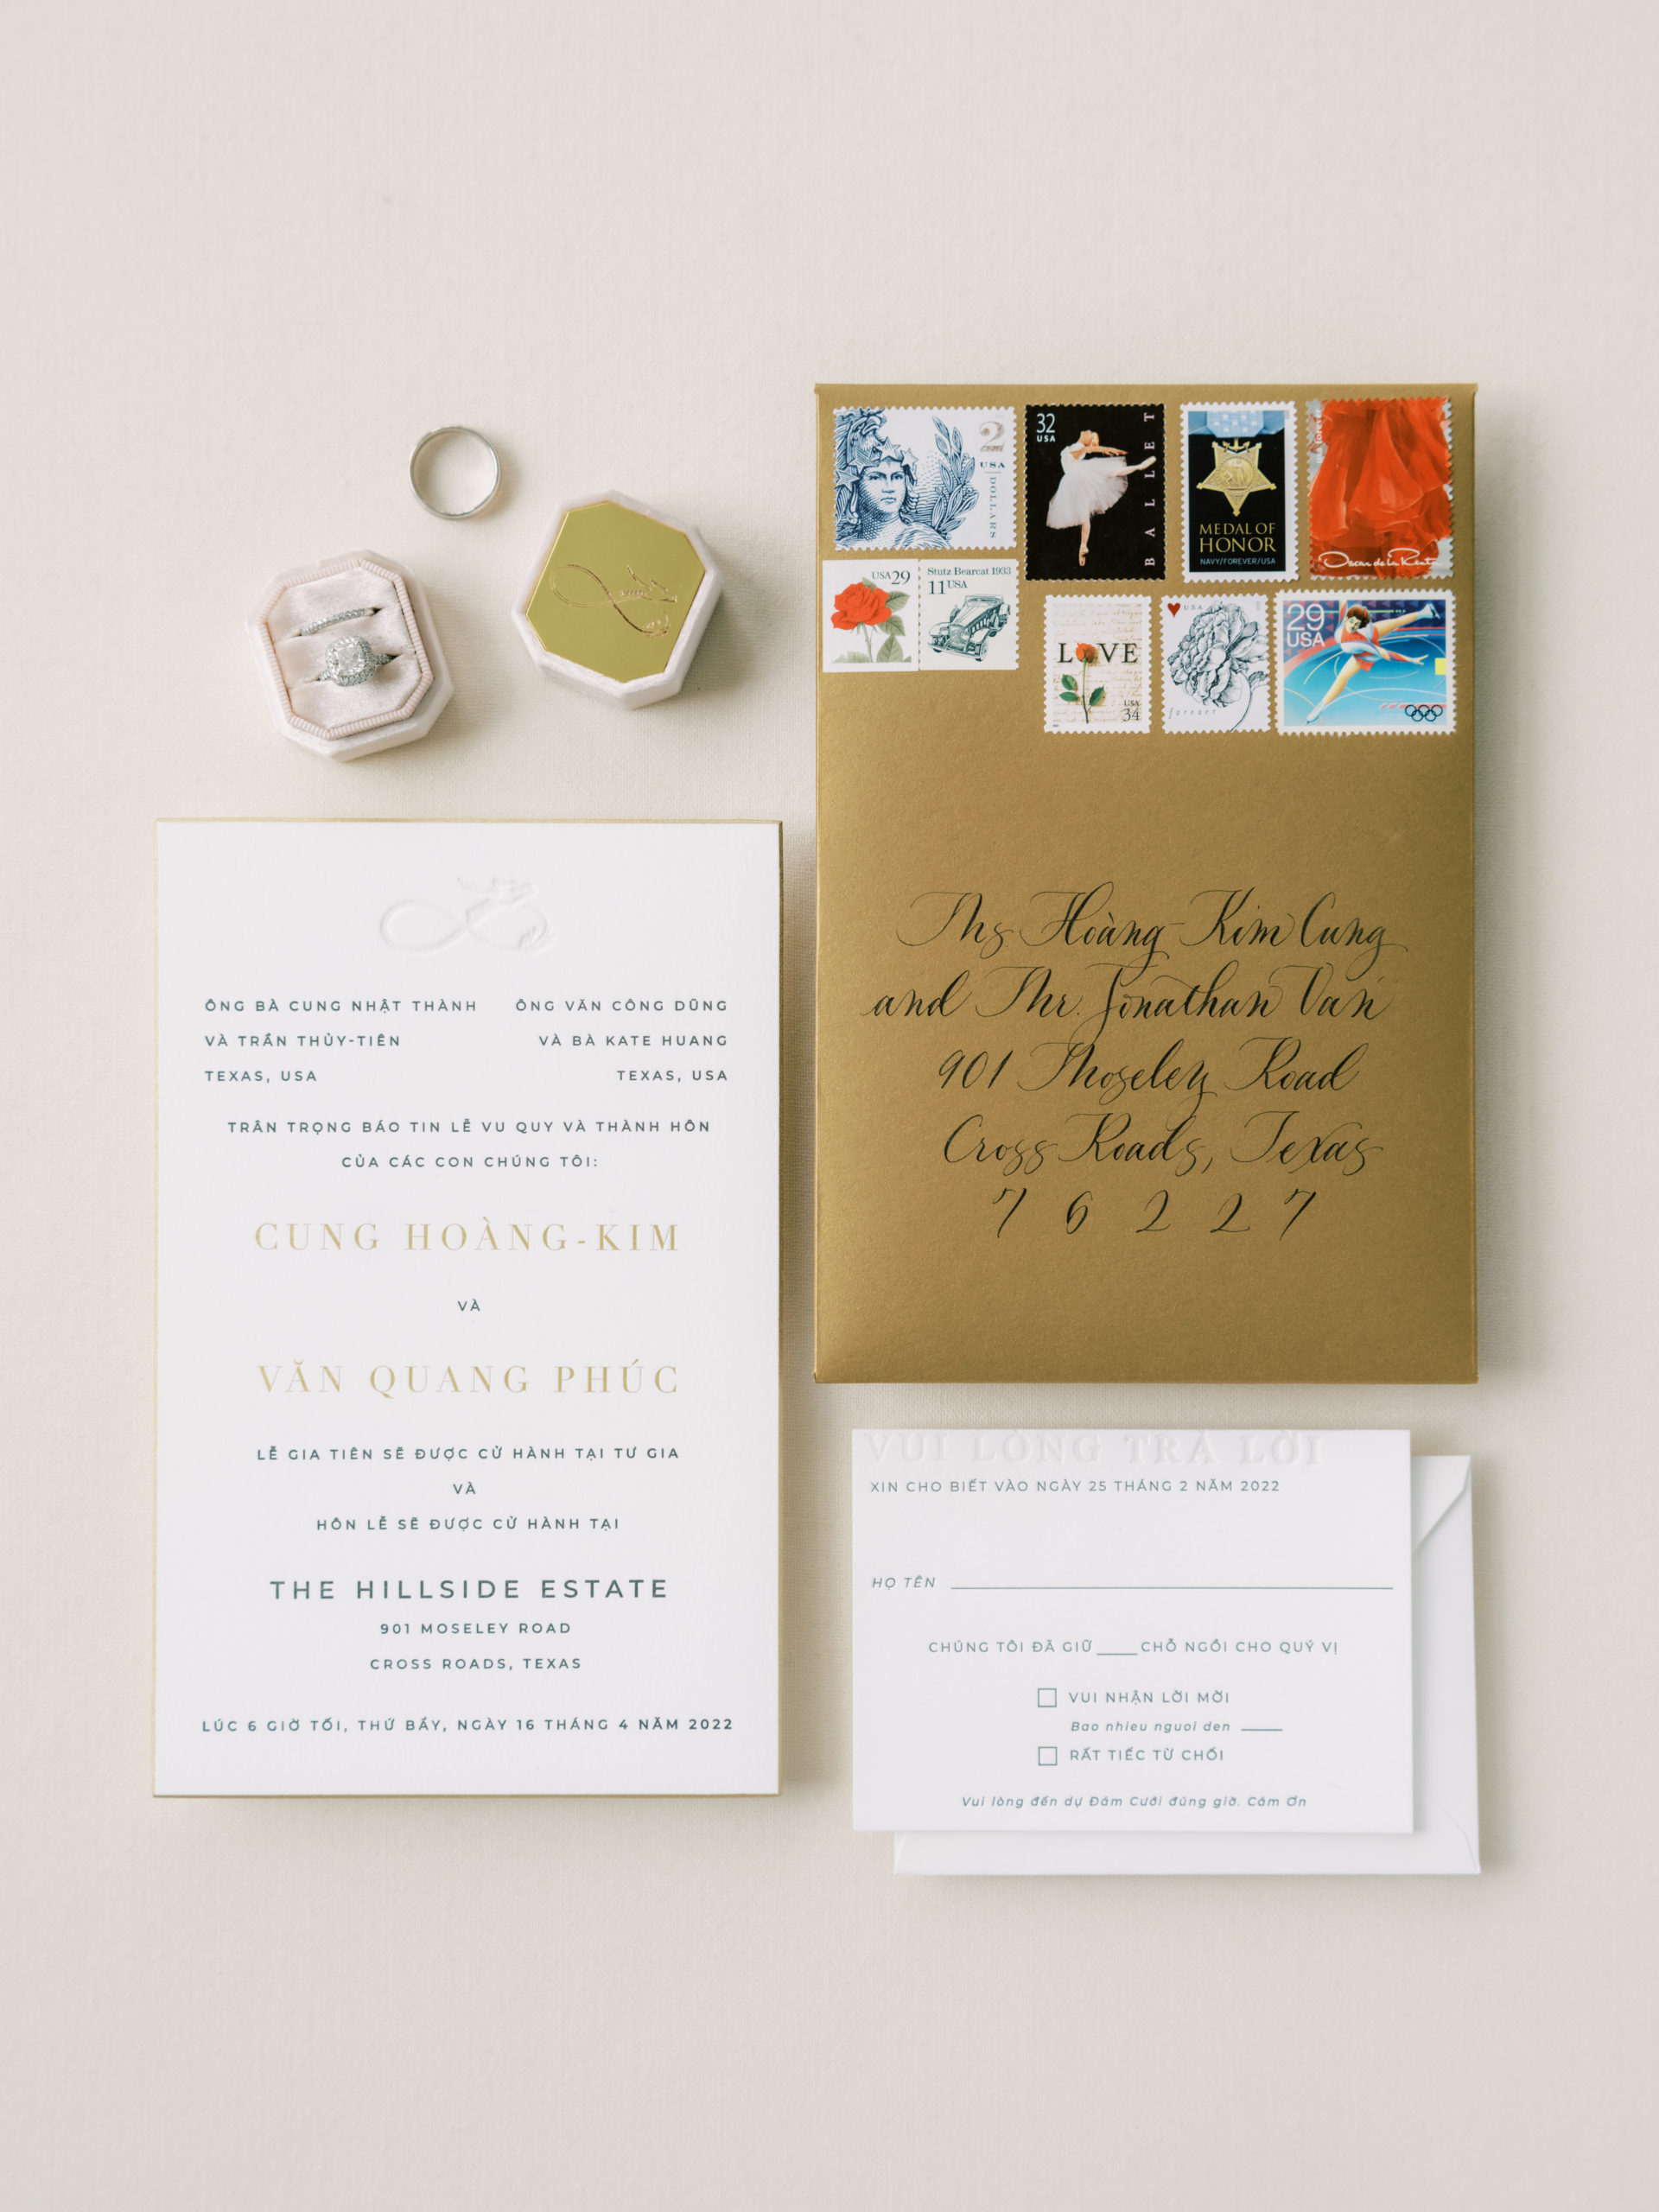 Custom wedding invitations for blogger Hoang-Kim Cung in Dallas, TX by Scribbles and Swirls